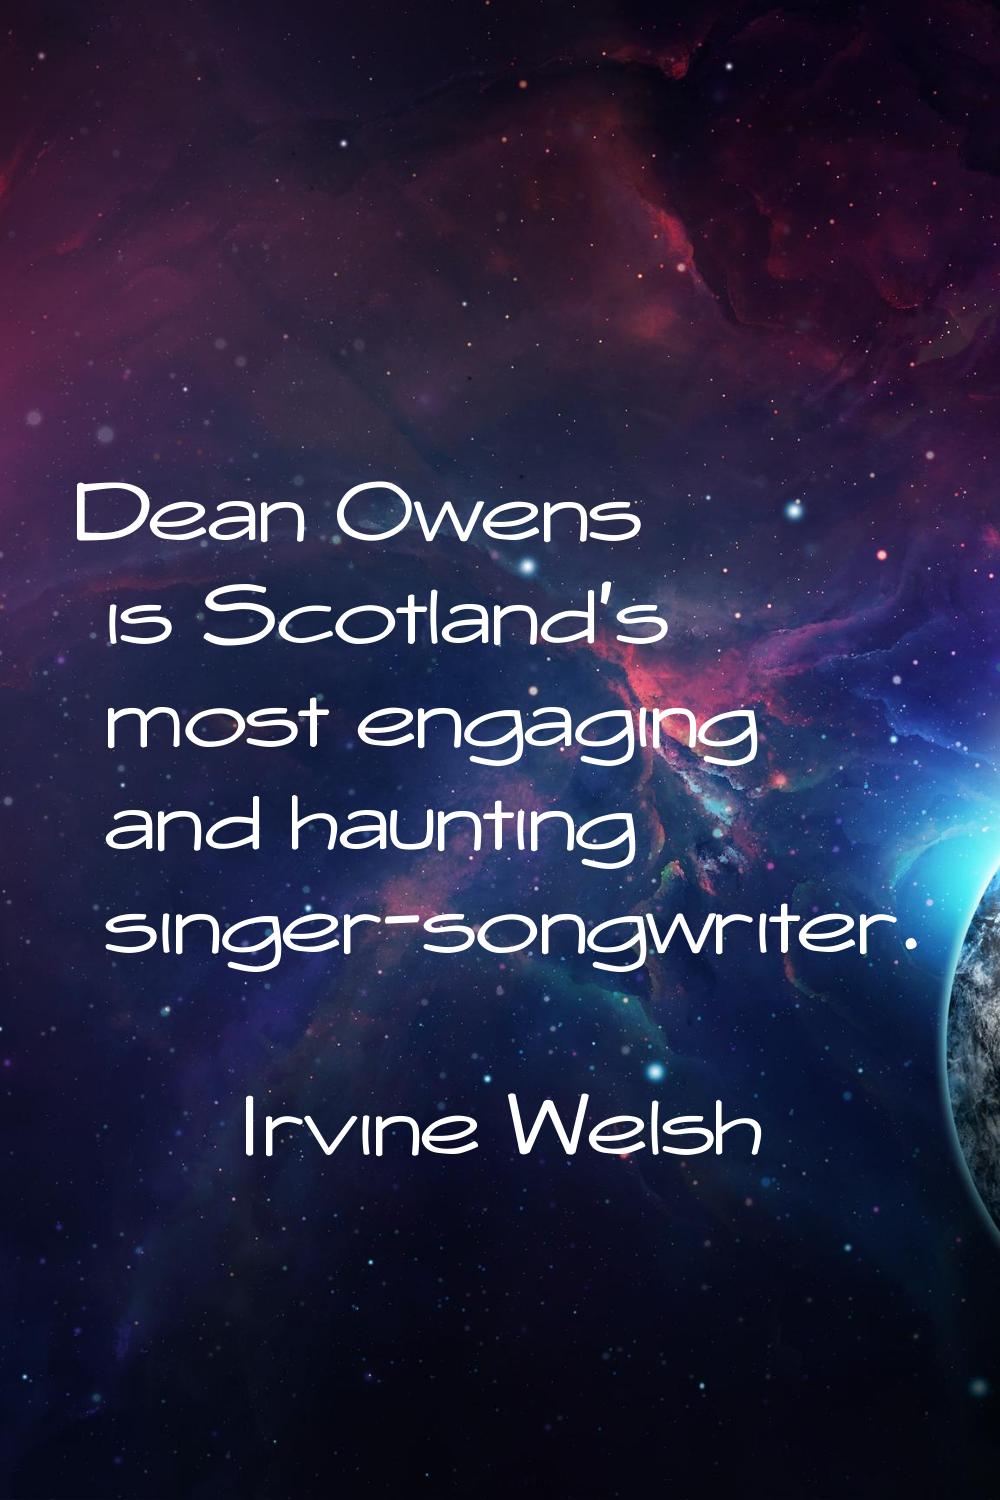 Dean Owens is Scotland's most engaging and haunting singer-songwriter.